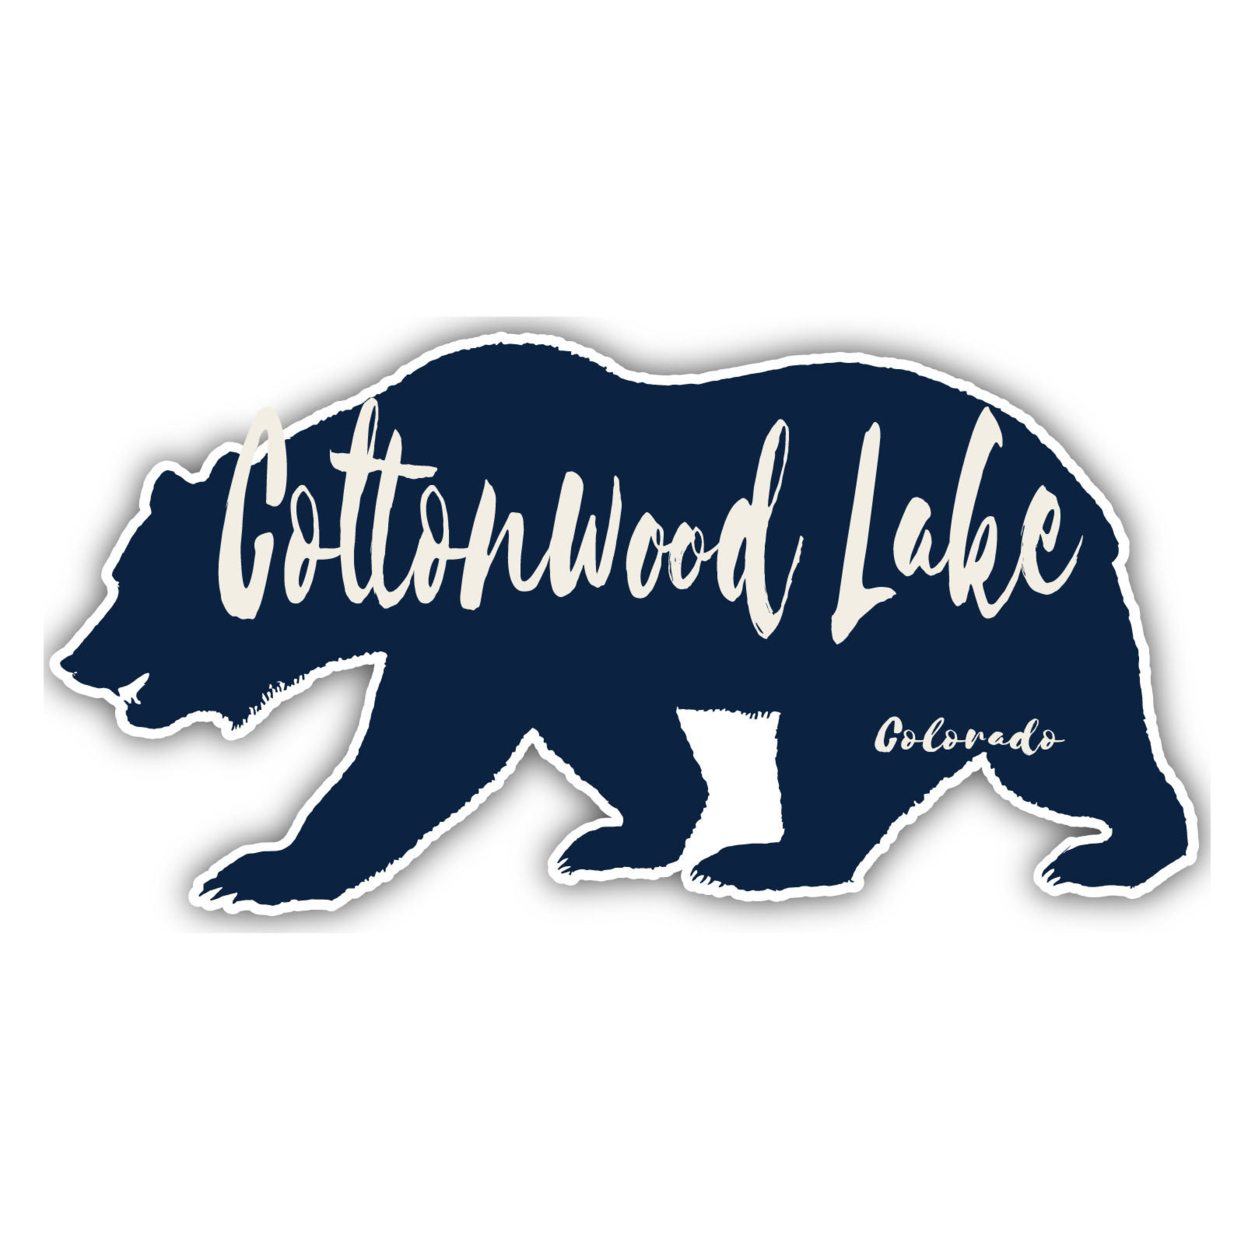 Cottonwood Lake Colorado Souvenir Decorative Stickers (Choose Theme And Size) - 4-Pack, 6-Inch, Tent